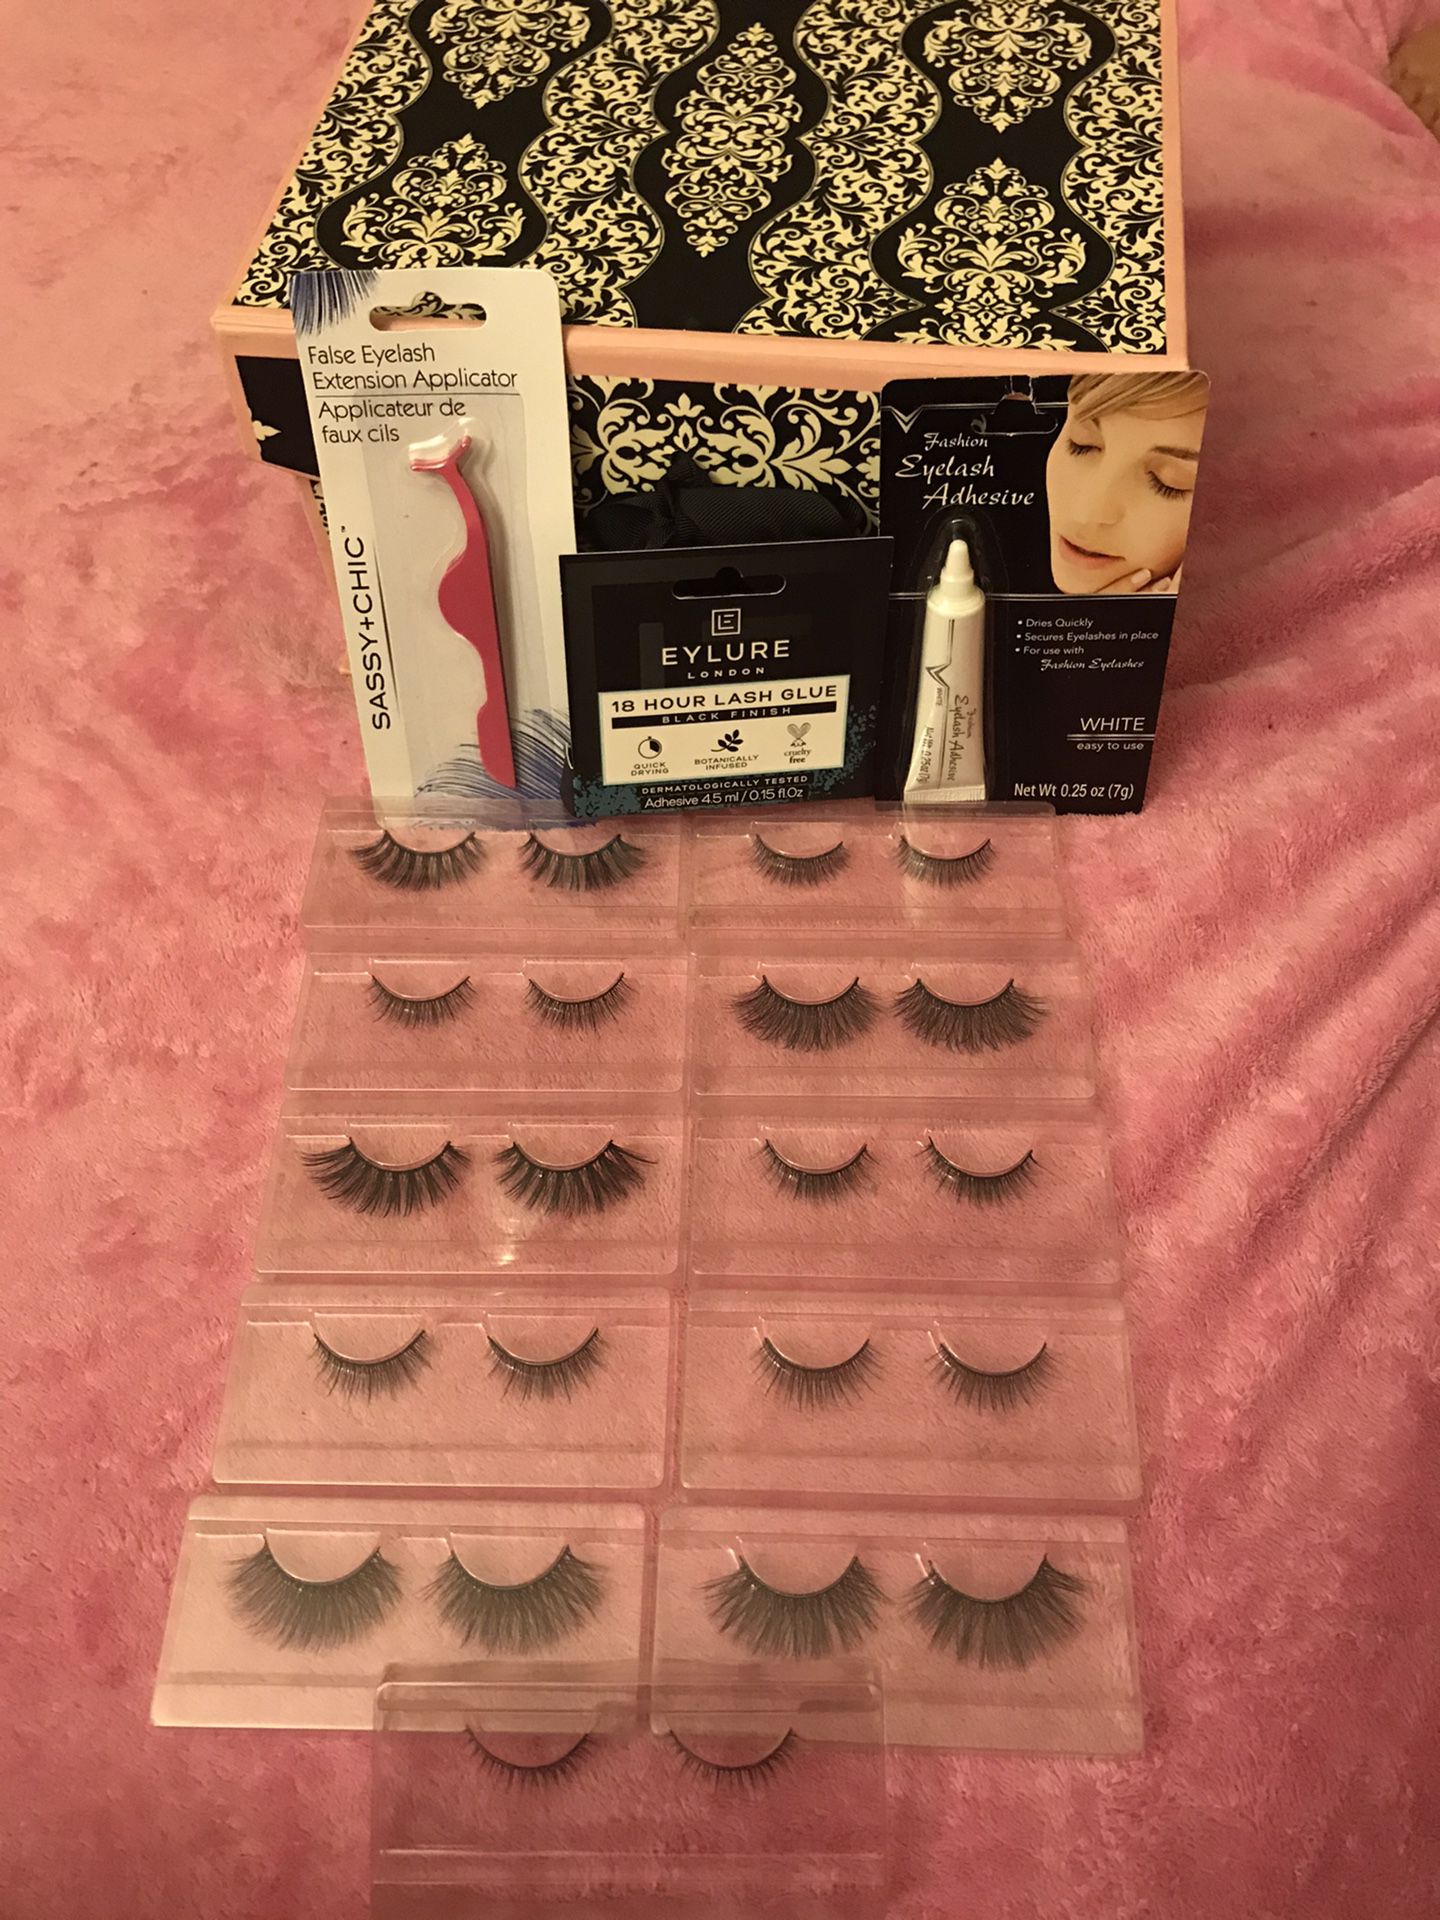 Brand new luxe lash set👀 $5 for all